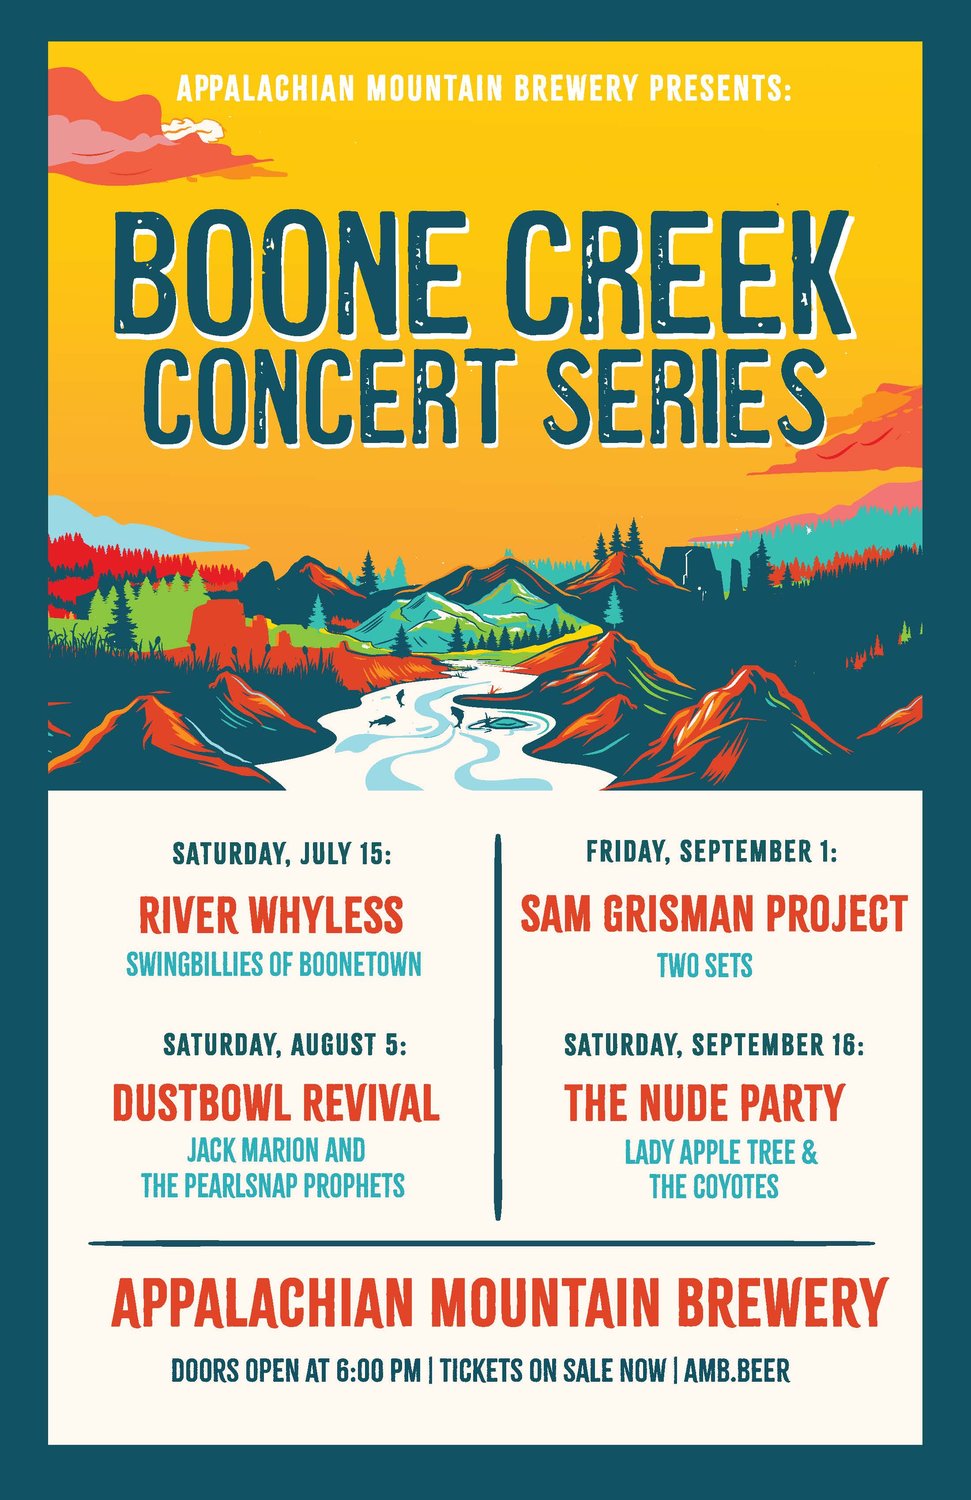 Boone Creek Concert Series - The Nude Party w/ The Coyotes and Lady Apple Tree